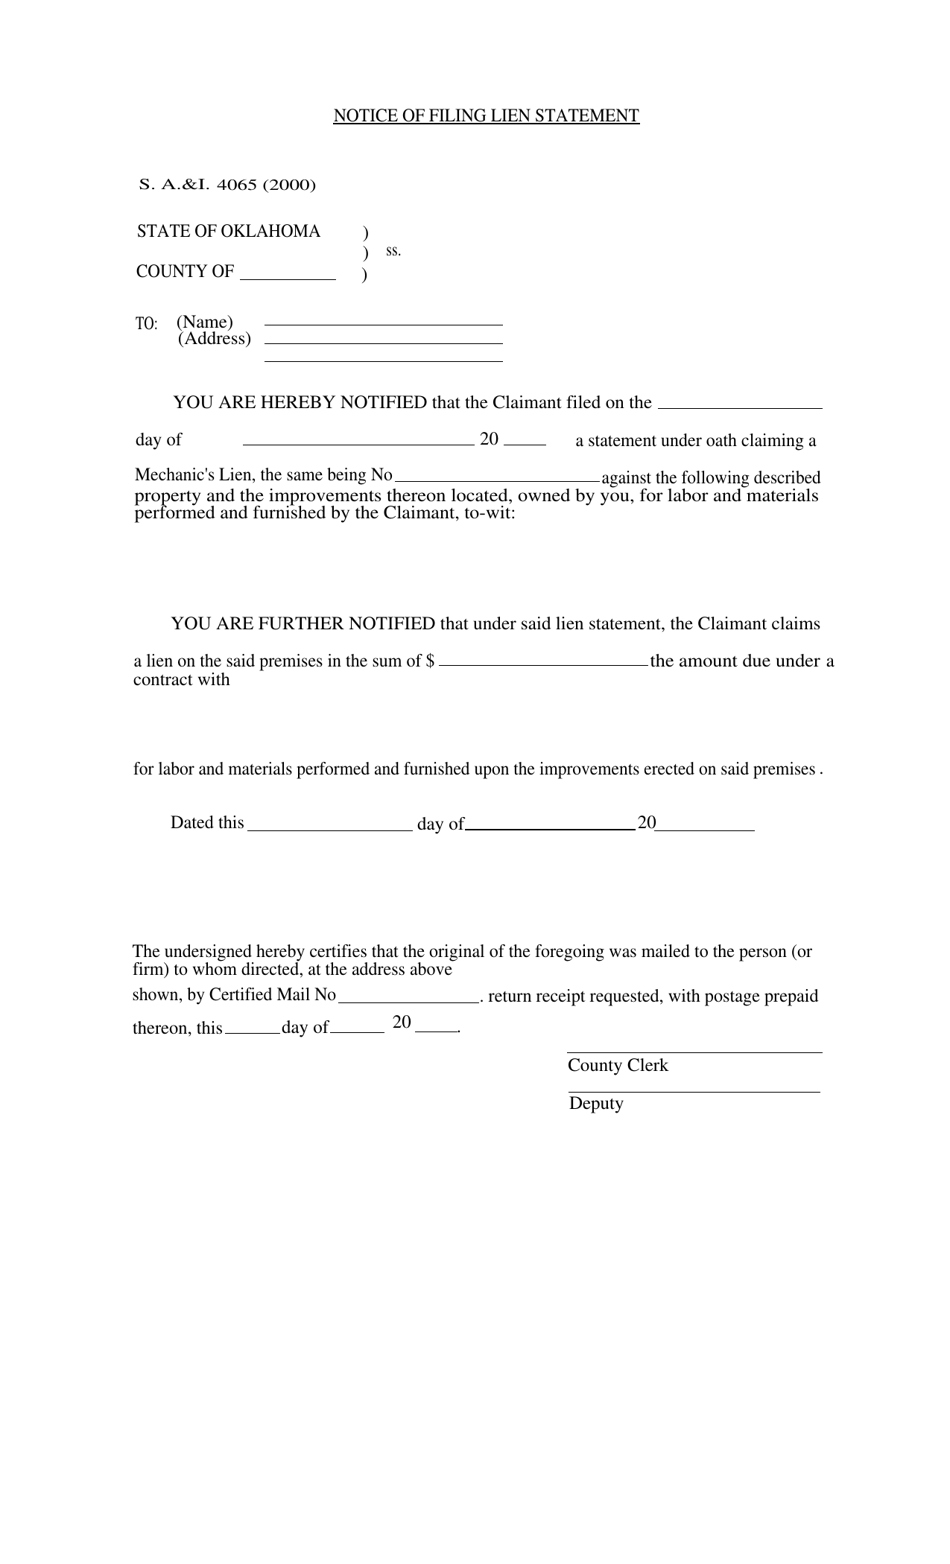 Form S.A. I.4065 Notice of Filing Lien Statement - Oklahoma, Page 1